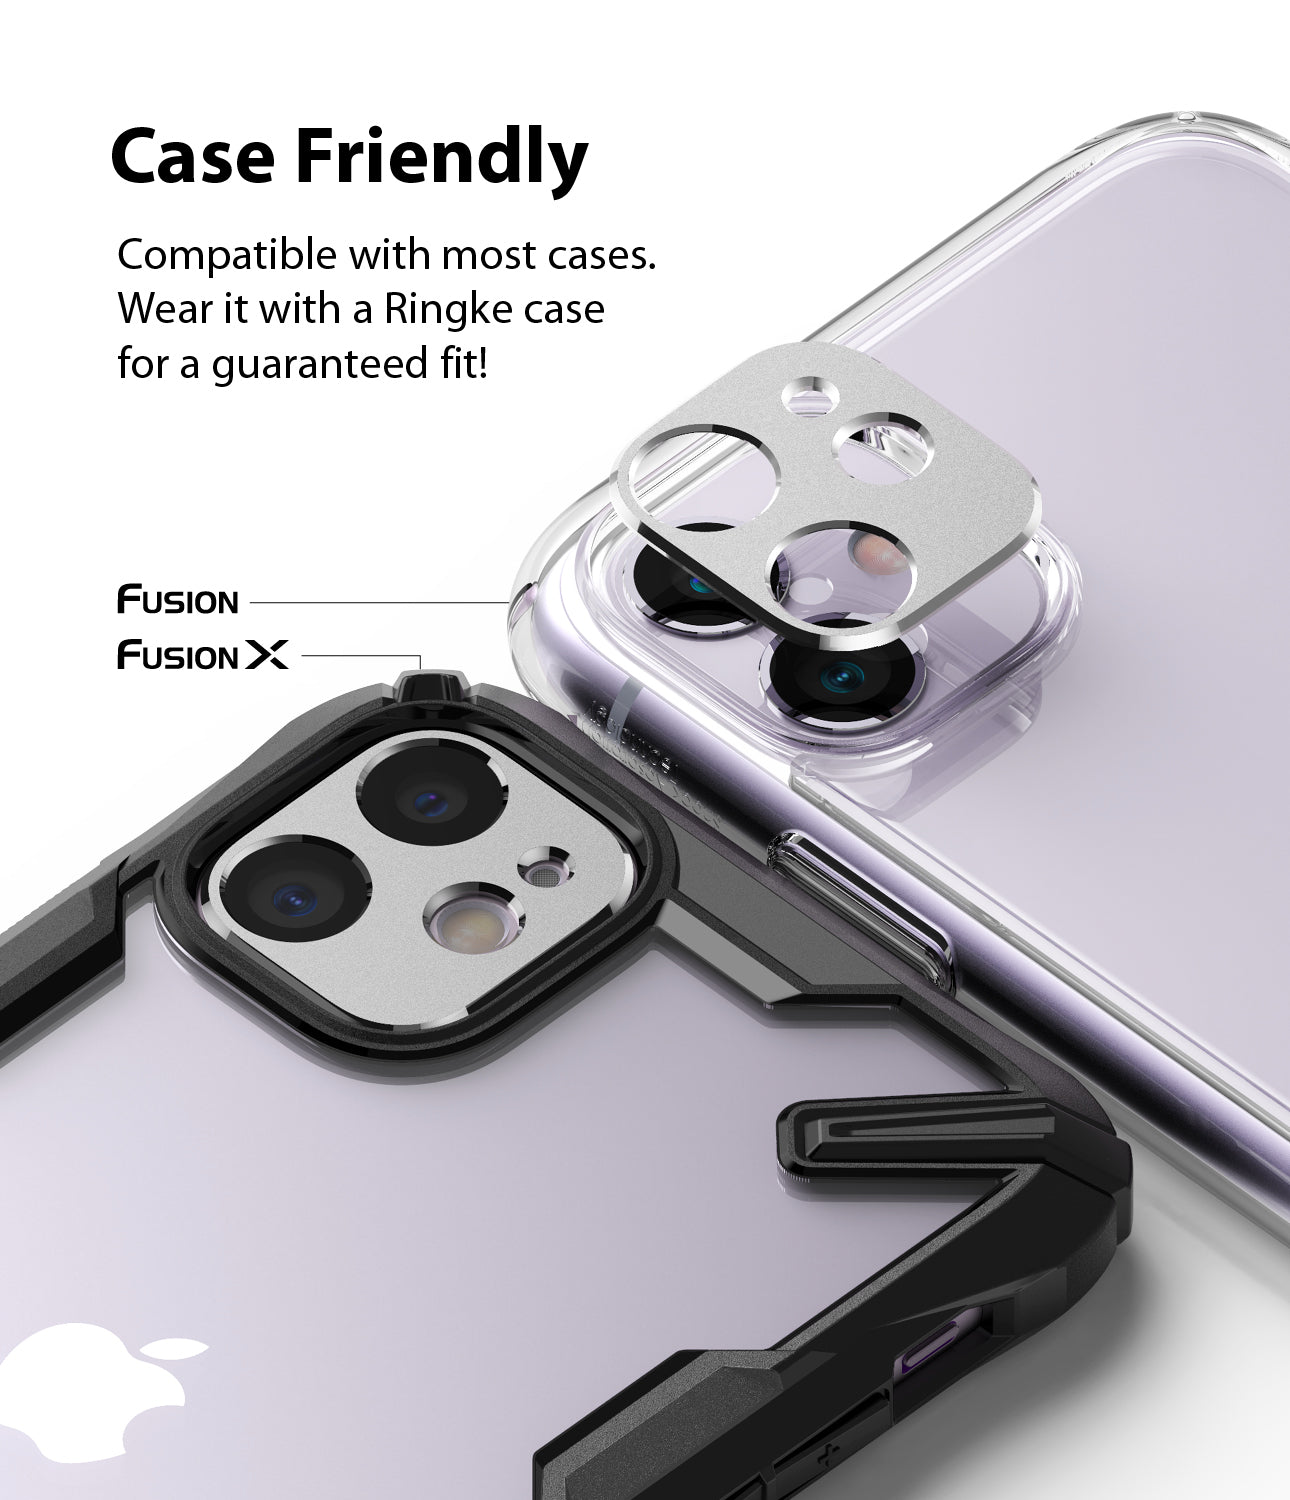 compatible with most cases. Wear it with a ringke case for a guarenteed fit